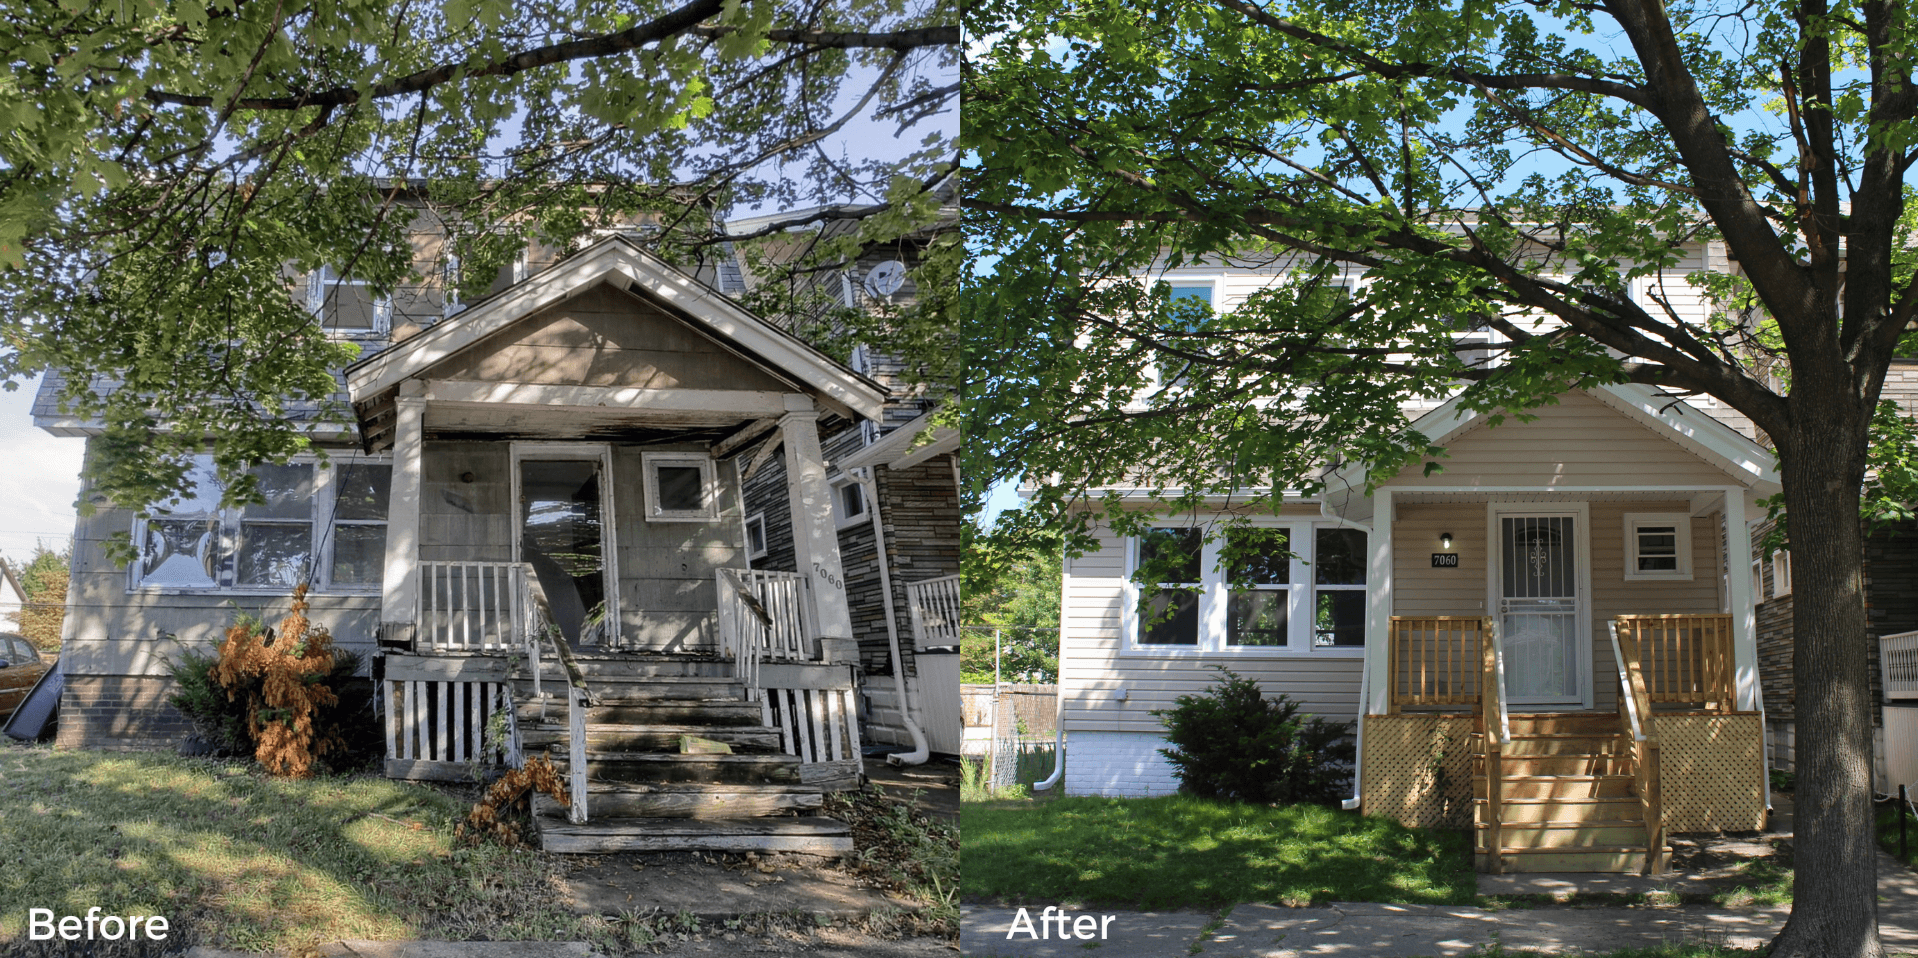 Southwest House Before and After Renovation